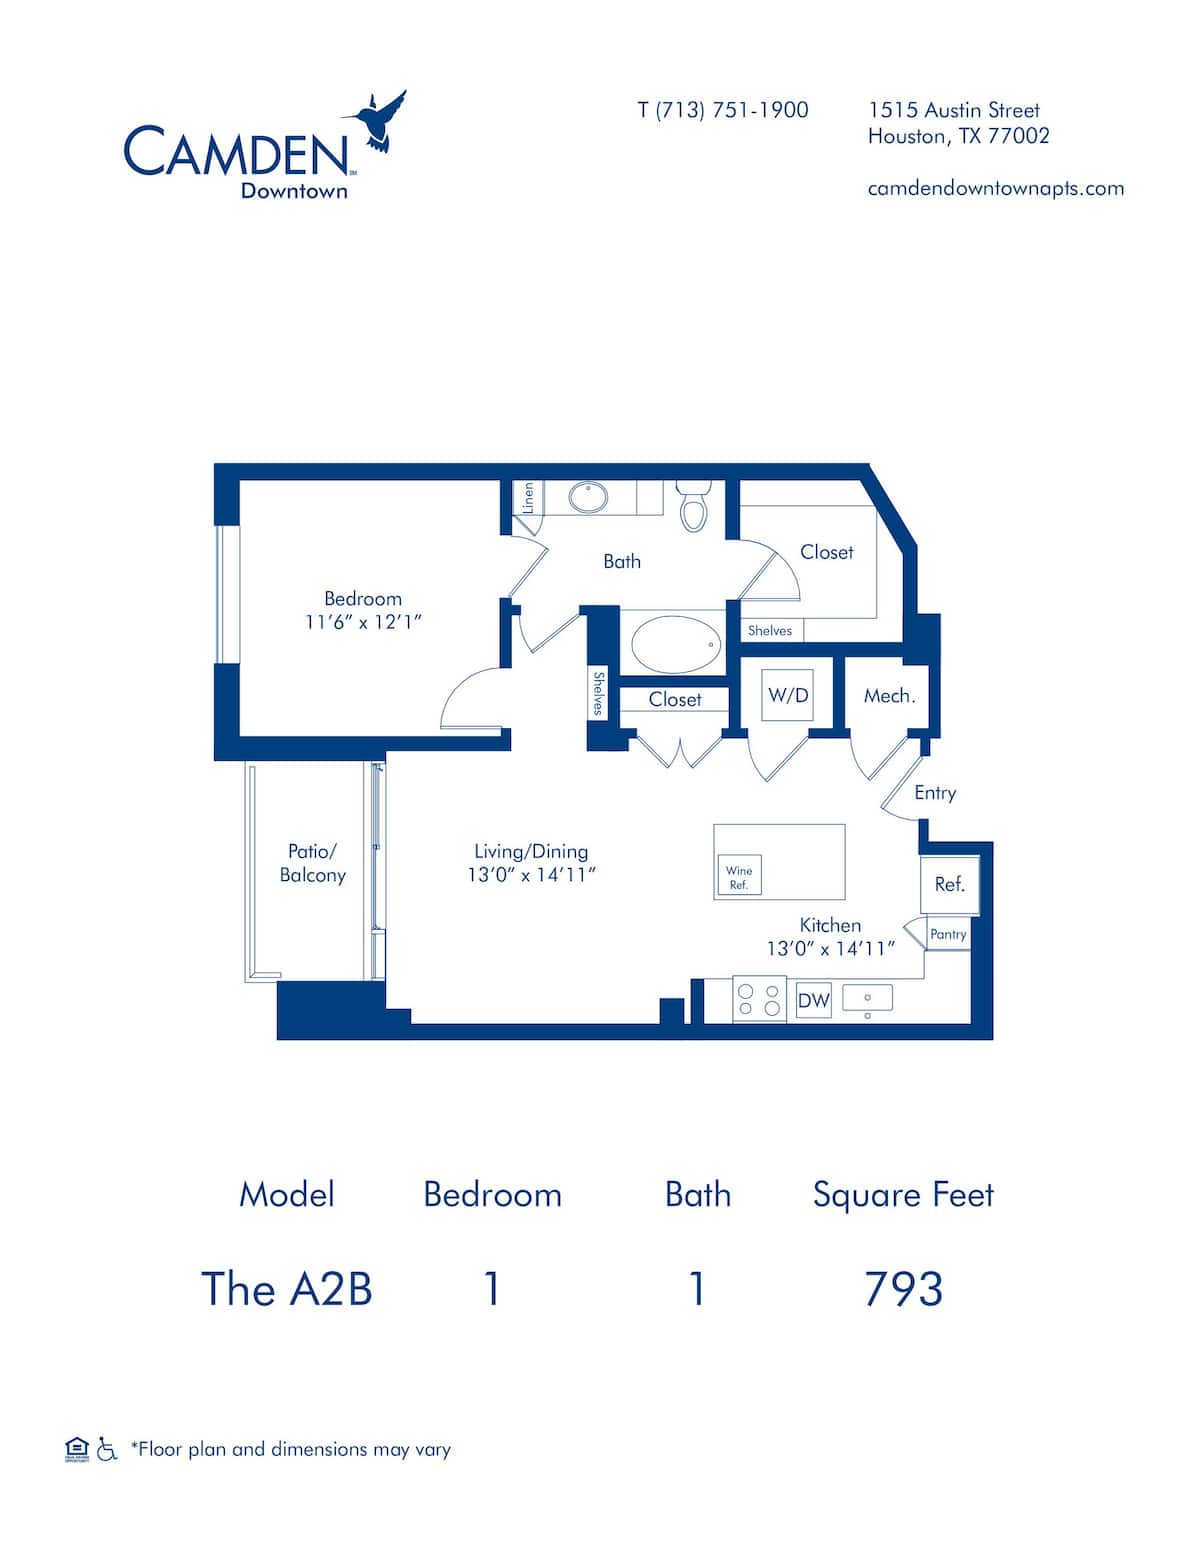 Floorplan diagram for The A2B, showing 1 bedroom